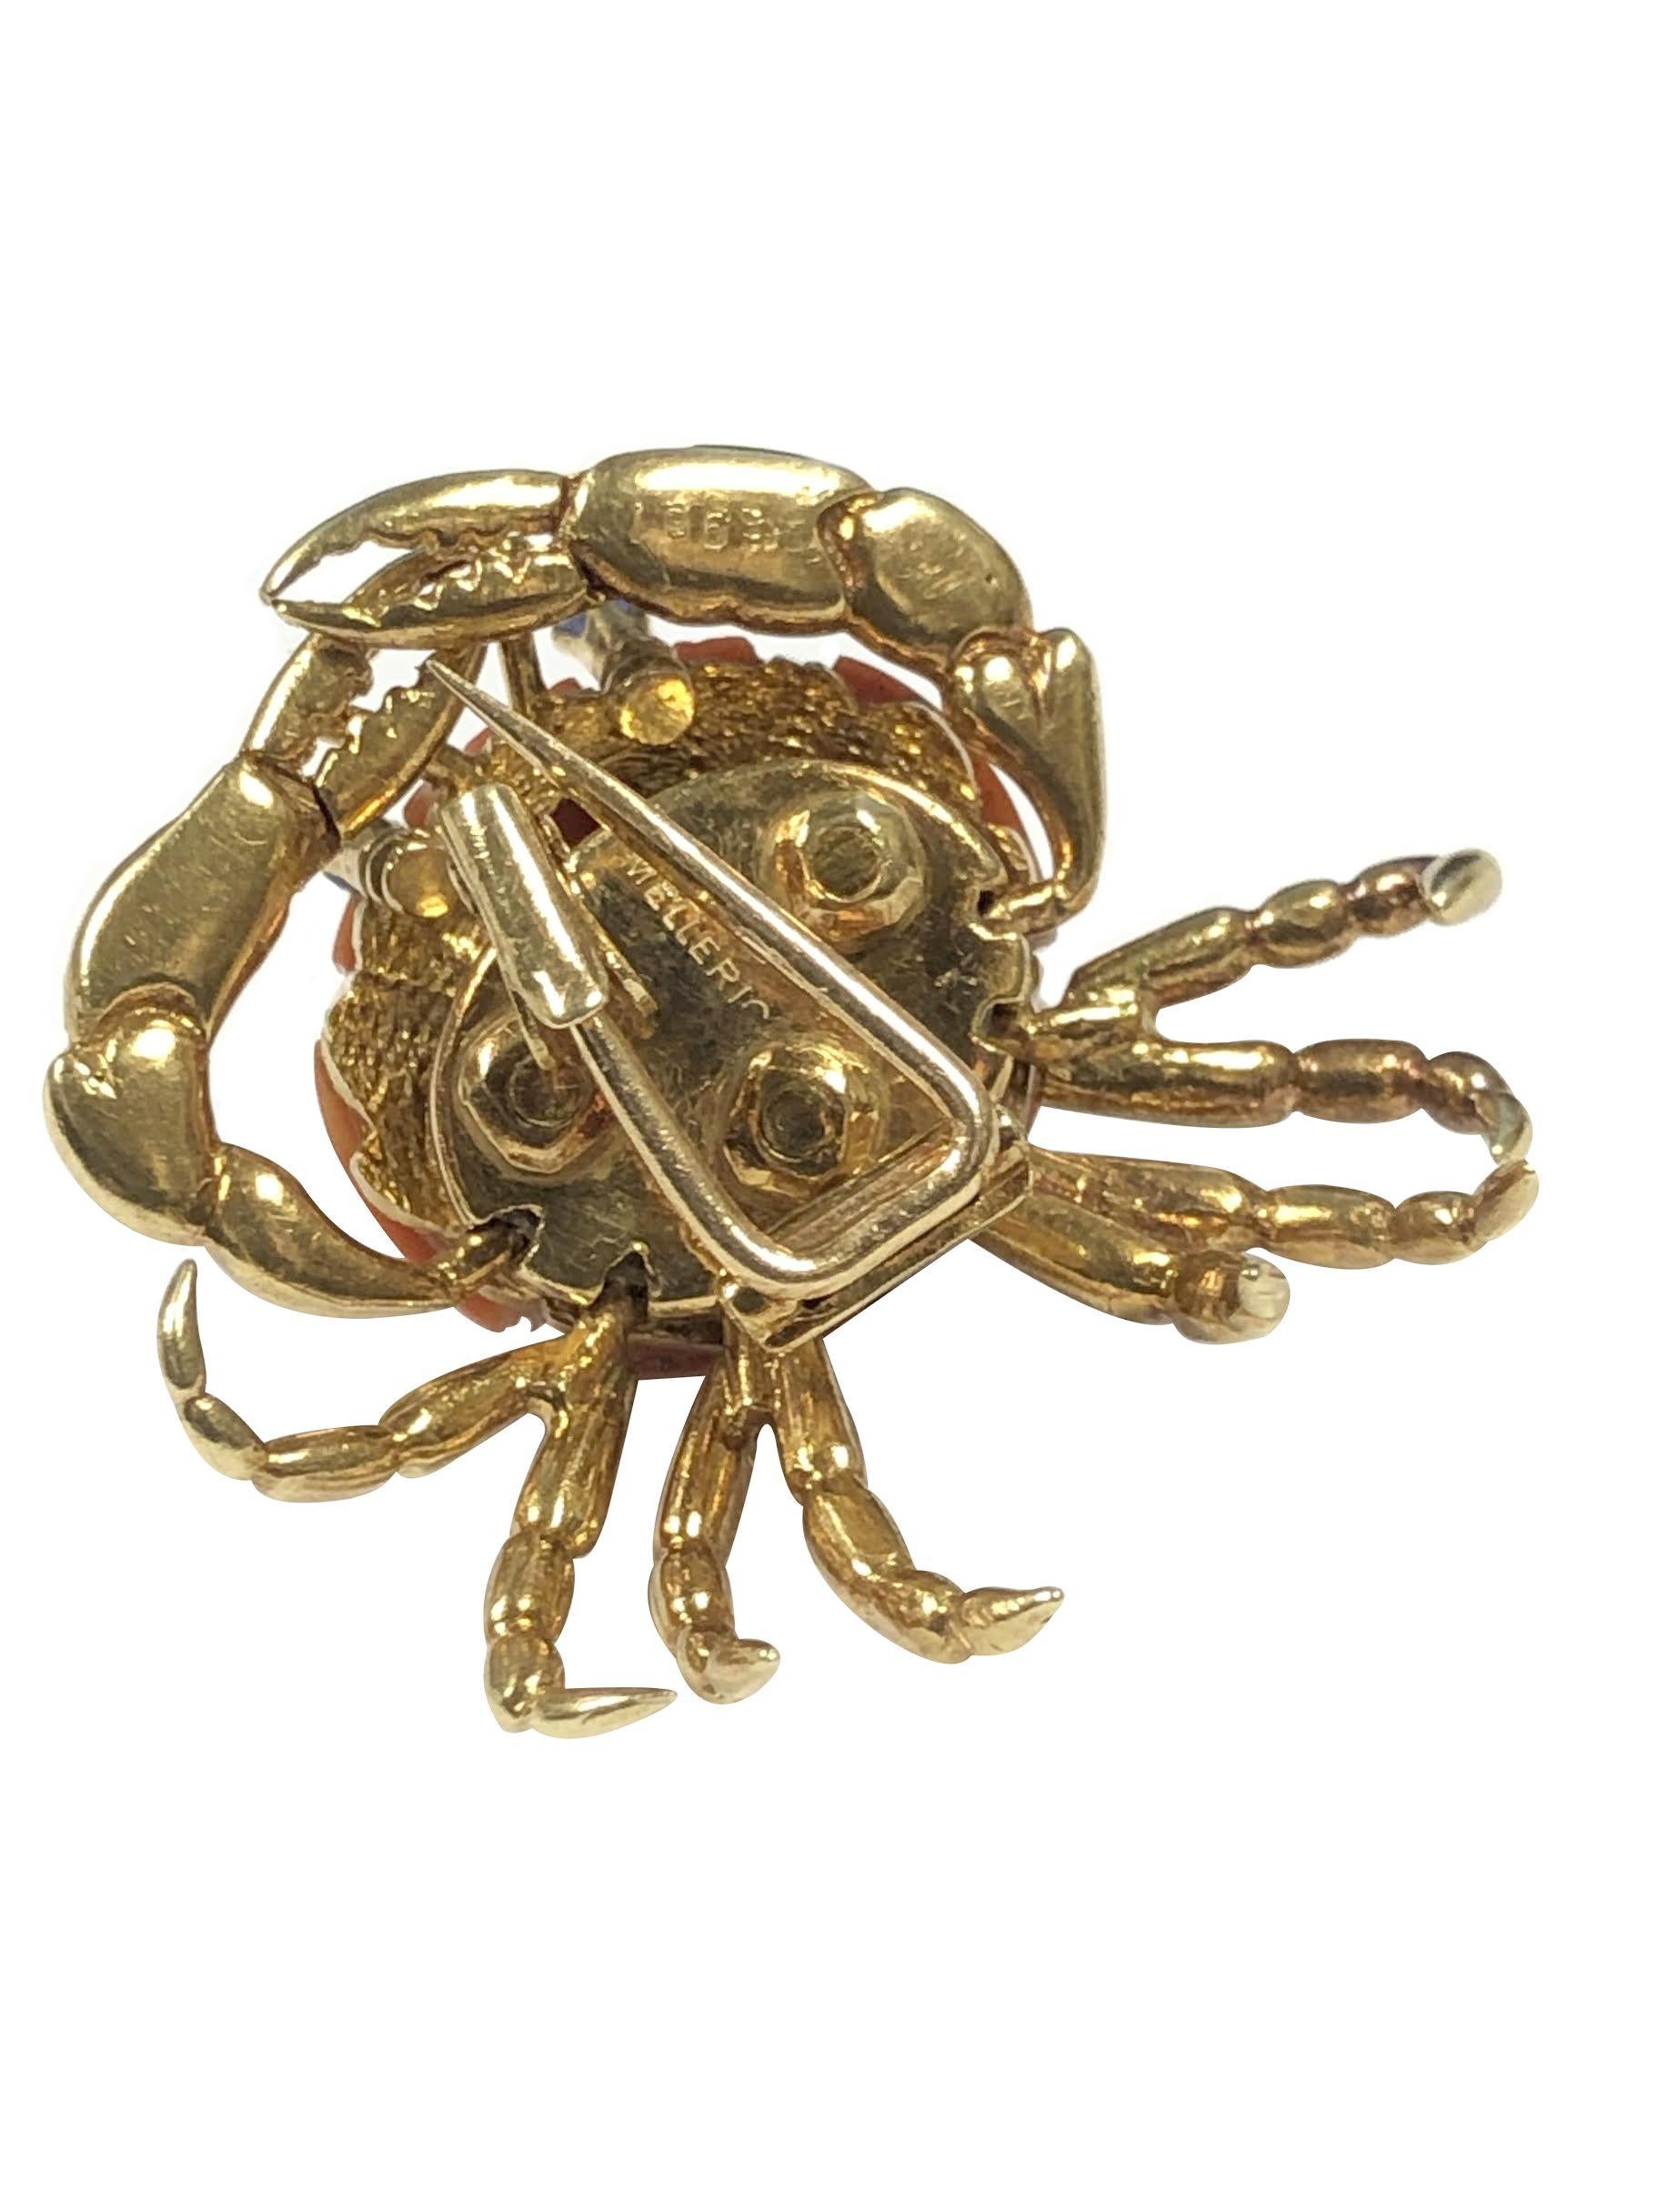 Circa 1970s Mellerio 18K Yellow Gold Crab Brooch, measuring 1 1/2 inch in Diameter and Having Articulated, moving Claws and Legs, centrally set with a 5/8 inch diameter Coral and also having Sapphire Eyes. Having a Double pin, clip fastener.